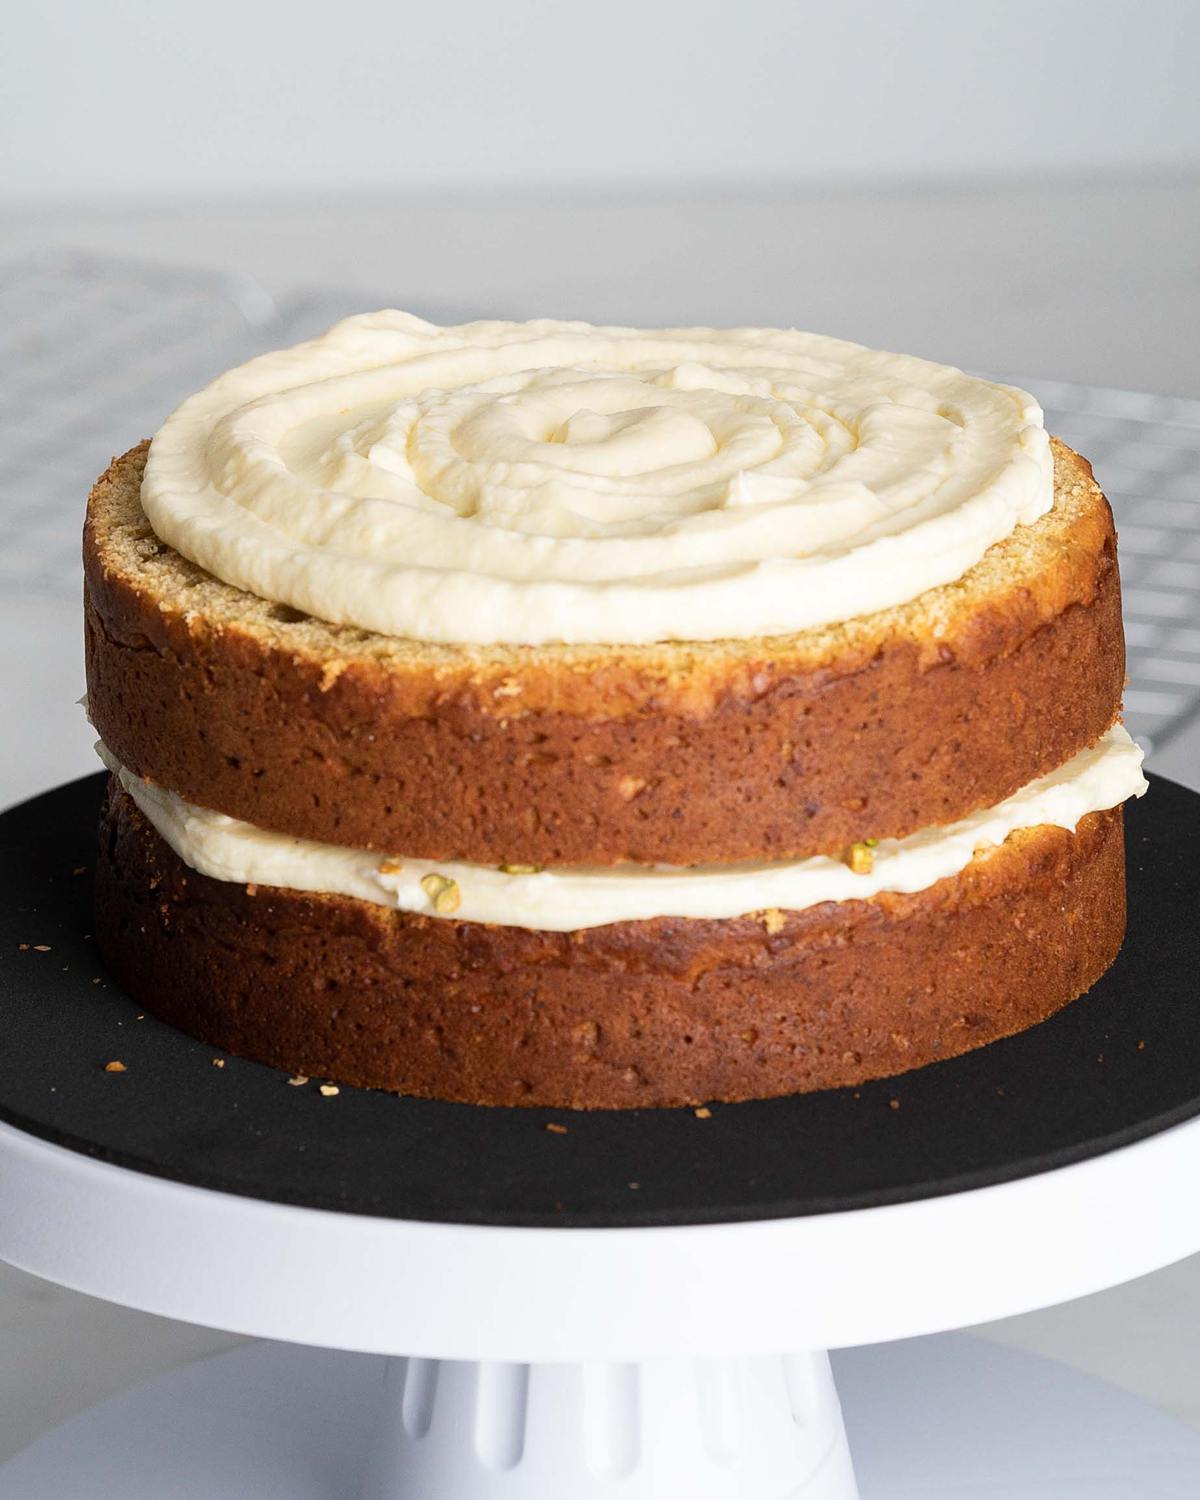 Pipe or spread buttercream in between the layers and over the top and sides of the cake...